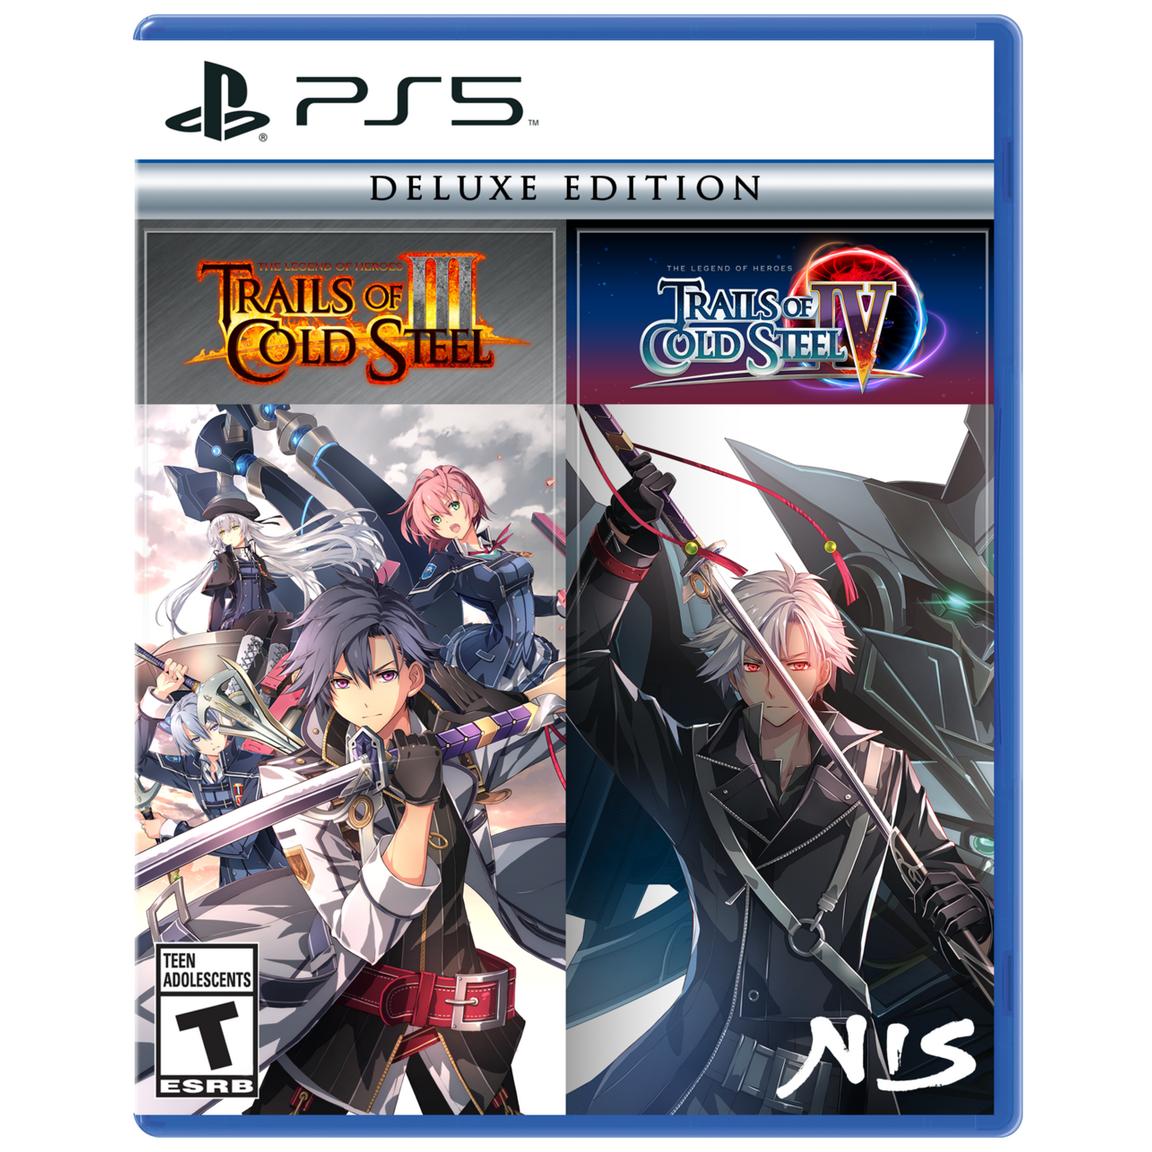 legend of nayuta boundless trails deluxe edition [ps4 английская версия] Видеоигра The Legend of Heroes: Trails of Cold Steel III / The Legend of Heroes: Trails of Cold Steel IV - Deluxe Edition - PlayStation 5